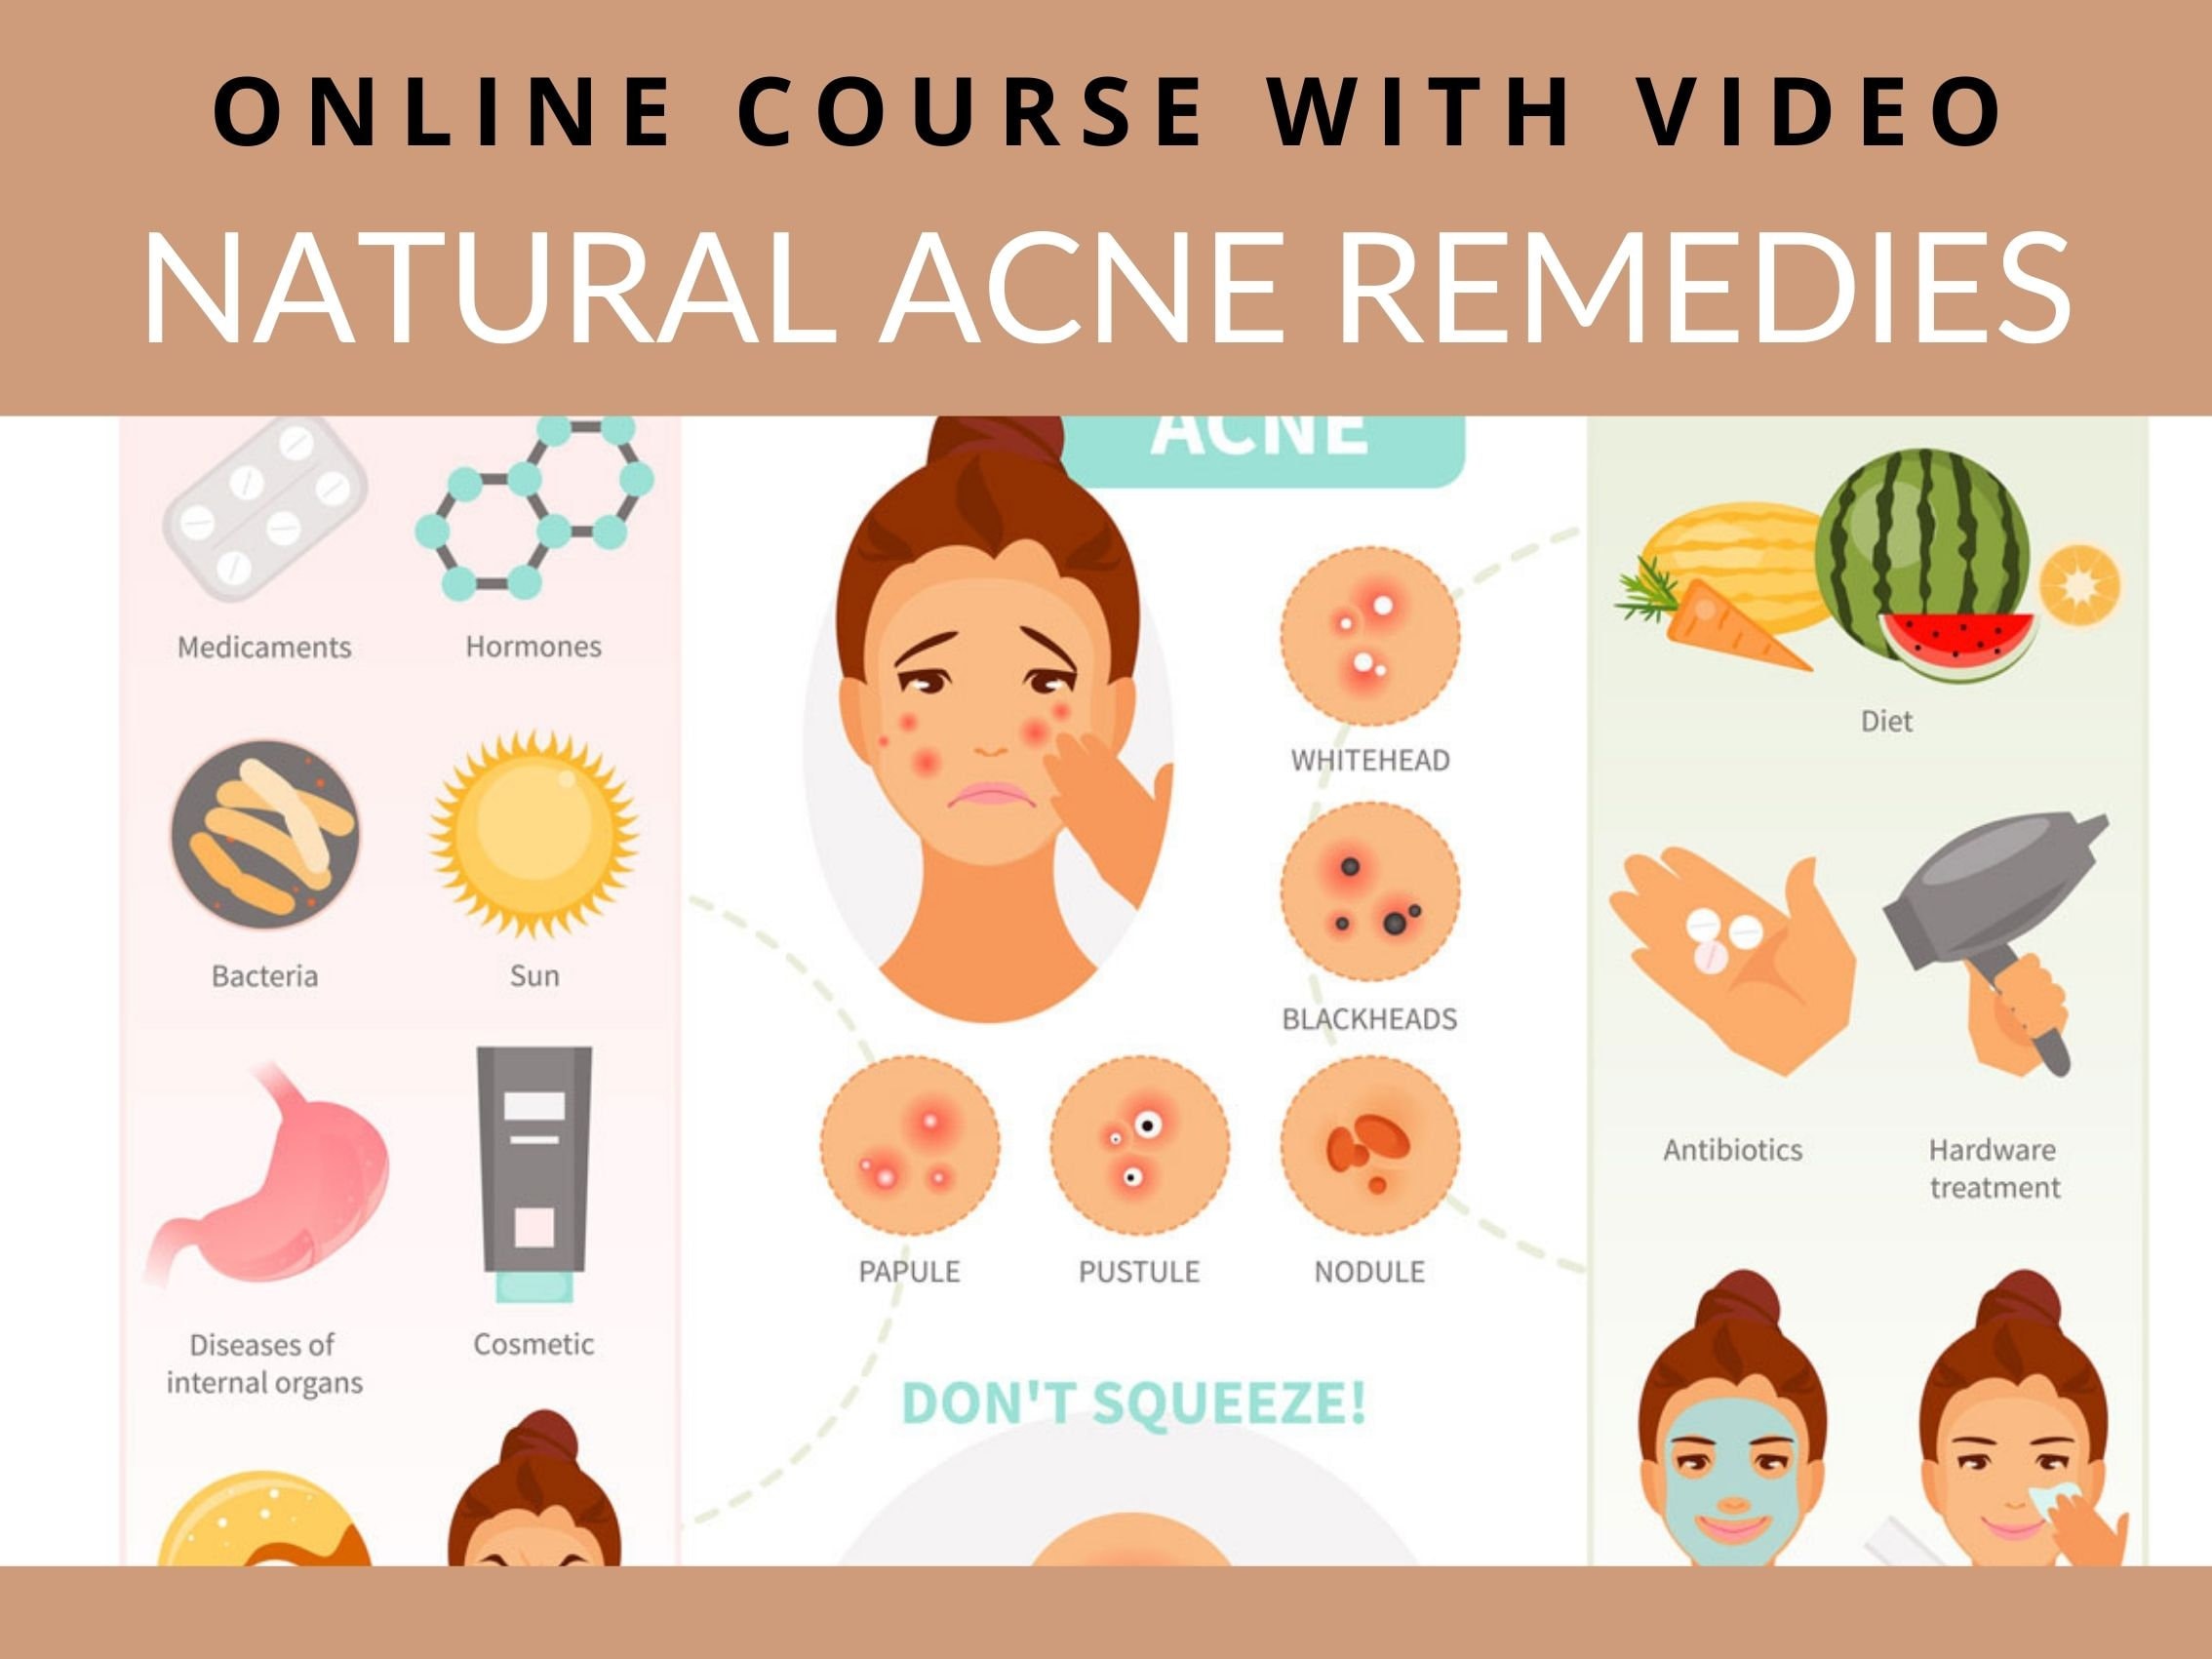 Natural Acne Remedies You Can Make at Home